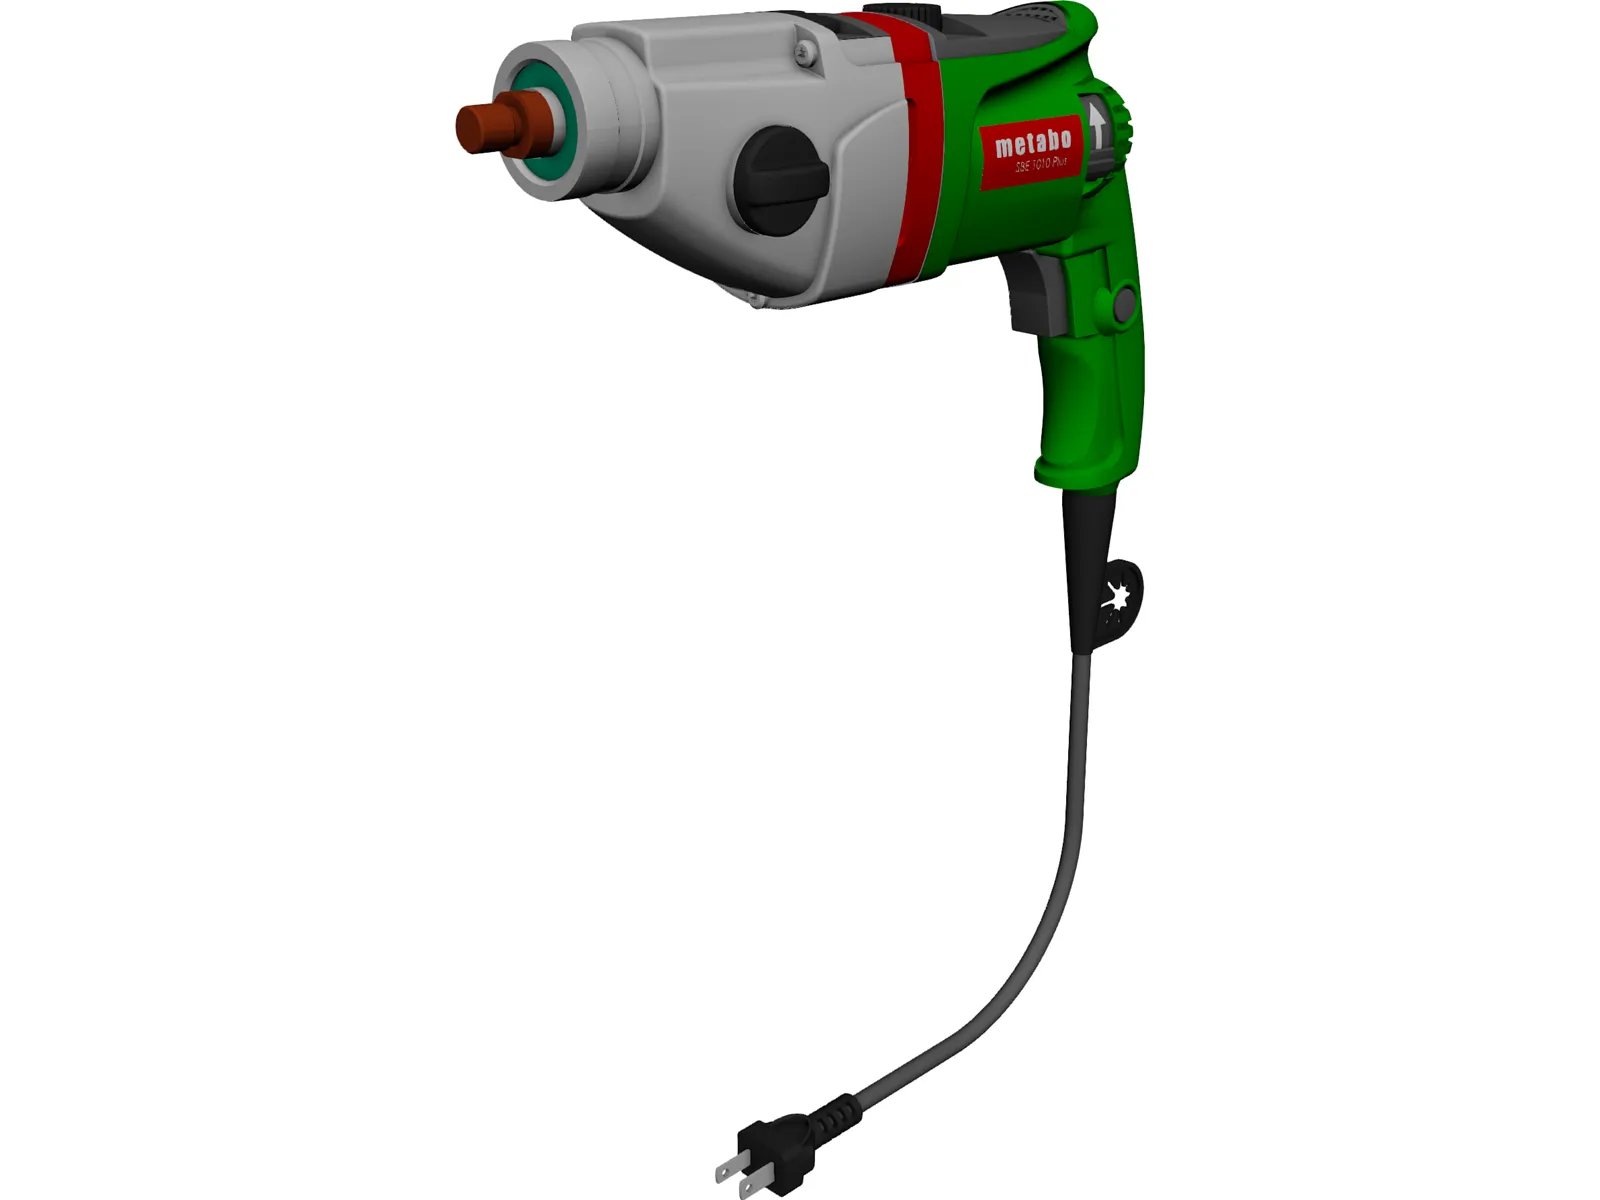 Power Drill Metabo SBE 1010 Plus 3D Model